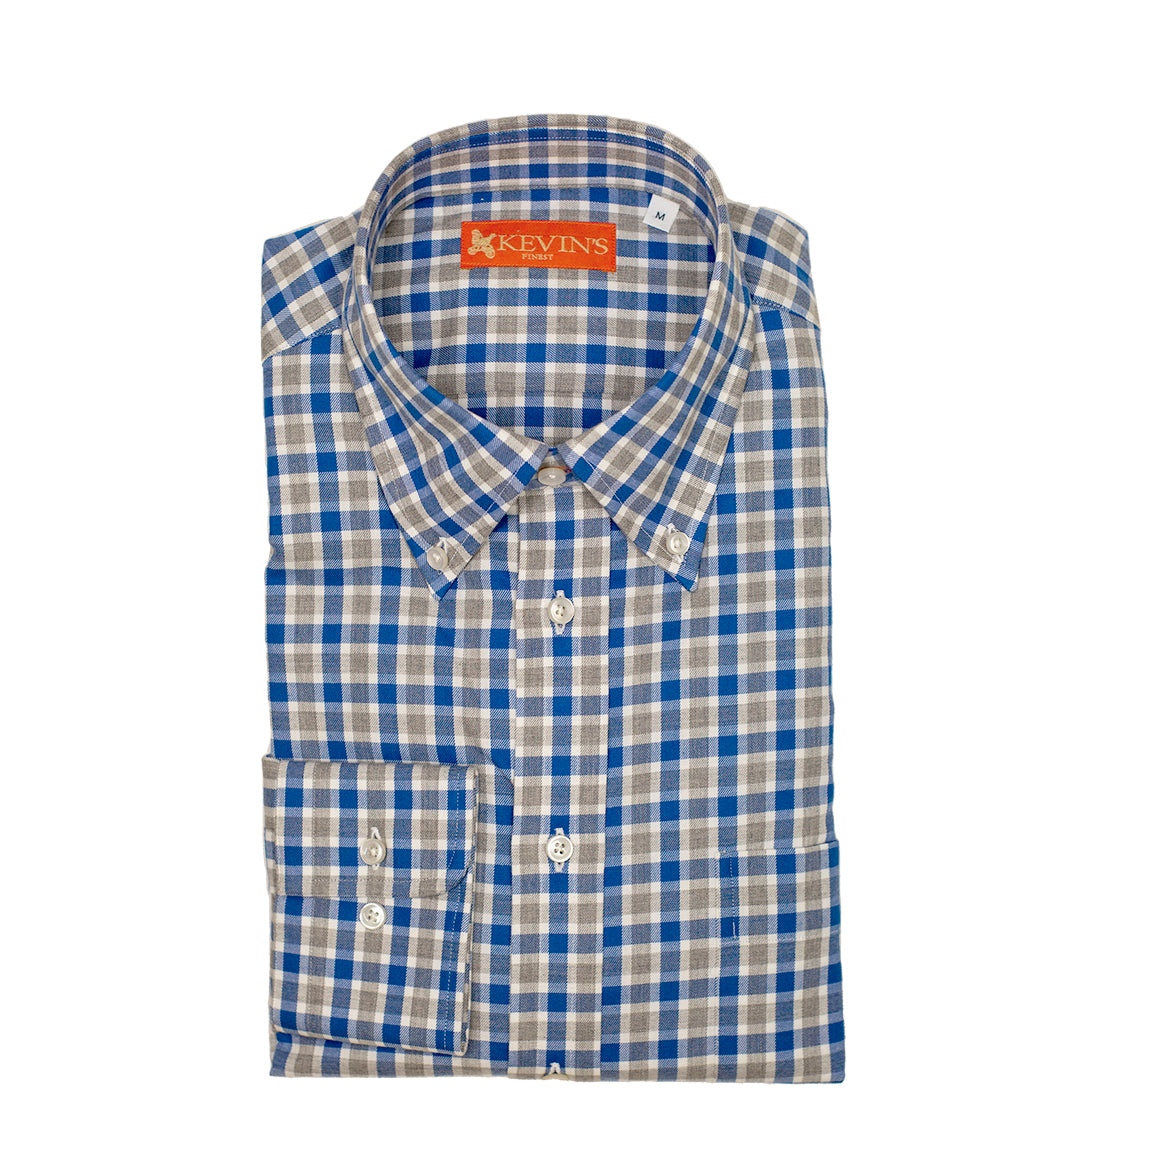 Kevin's Finest 100% Cotton Blue Beige Check Shirt-Men's Clothing-Kevin's Fine Outdoor Gear & Apparel